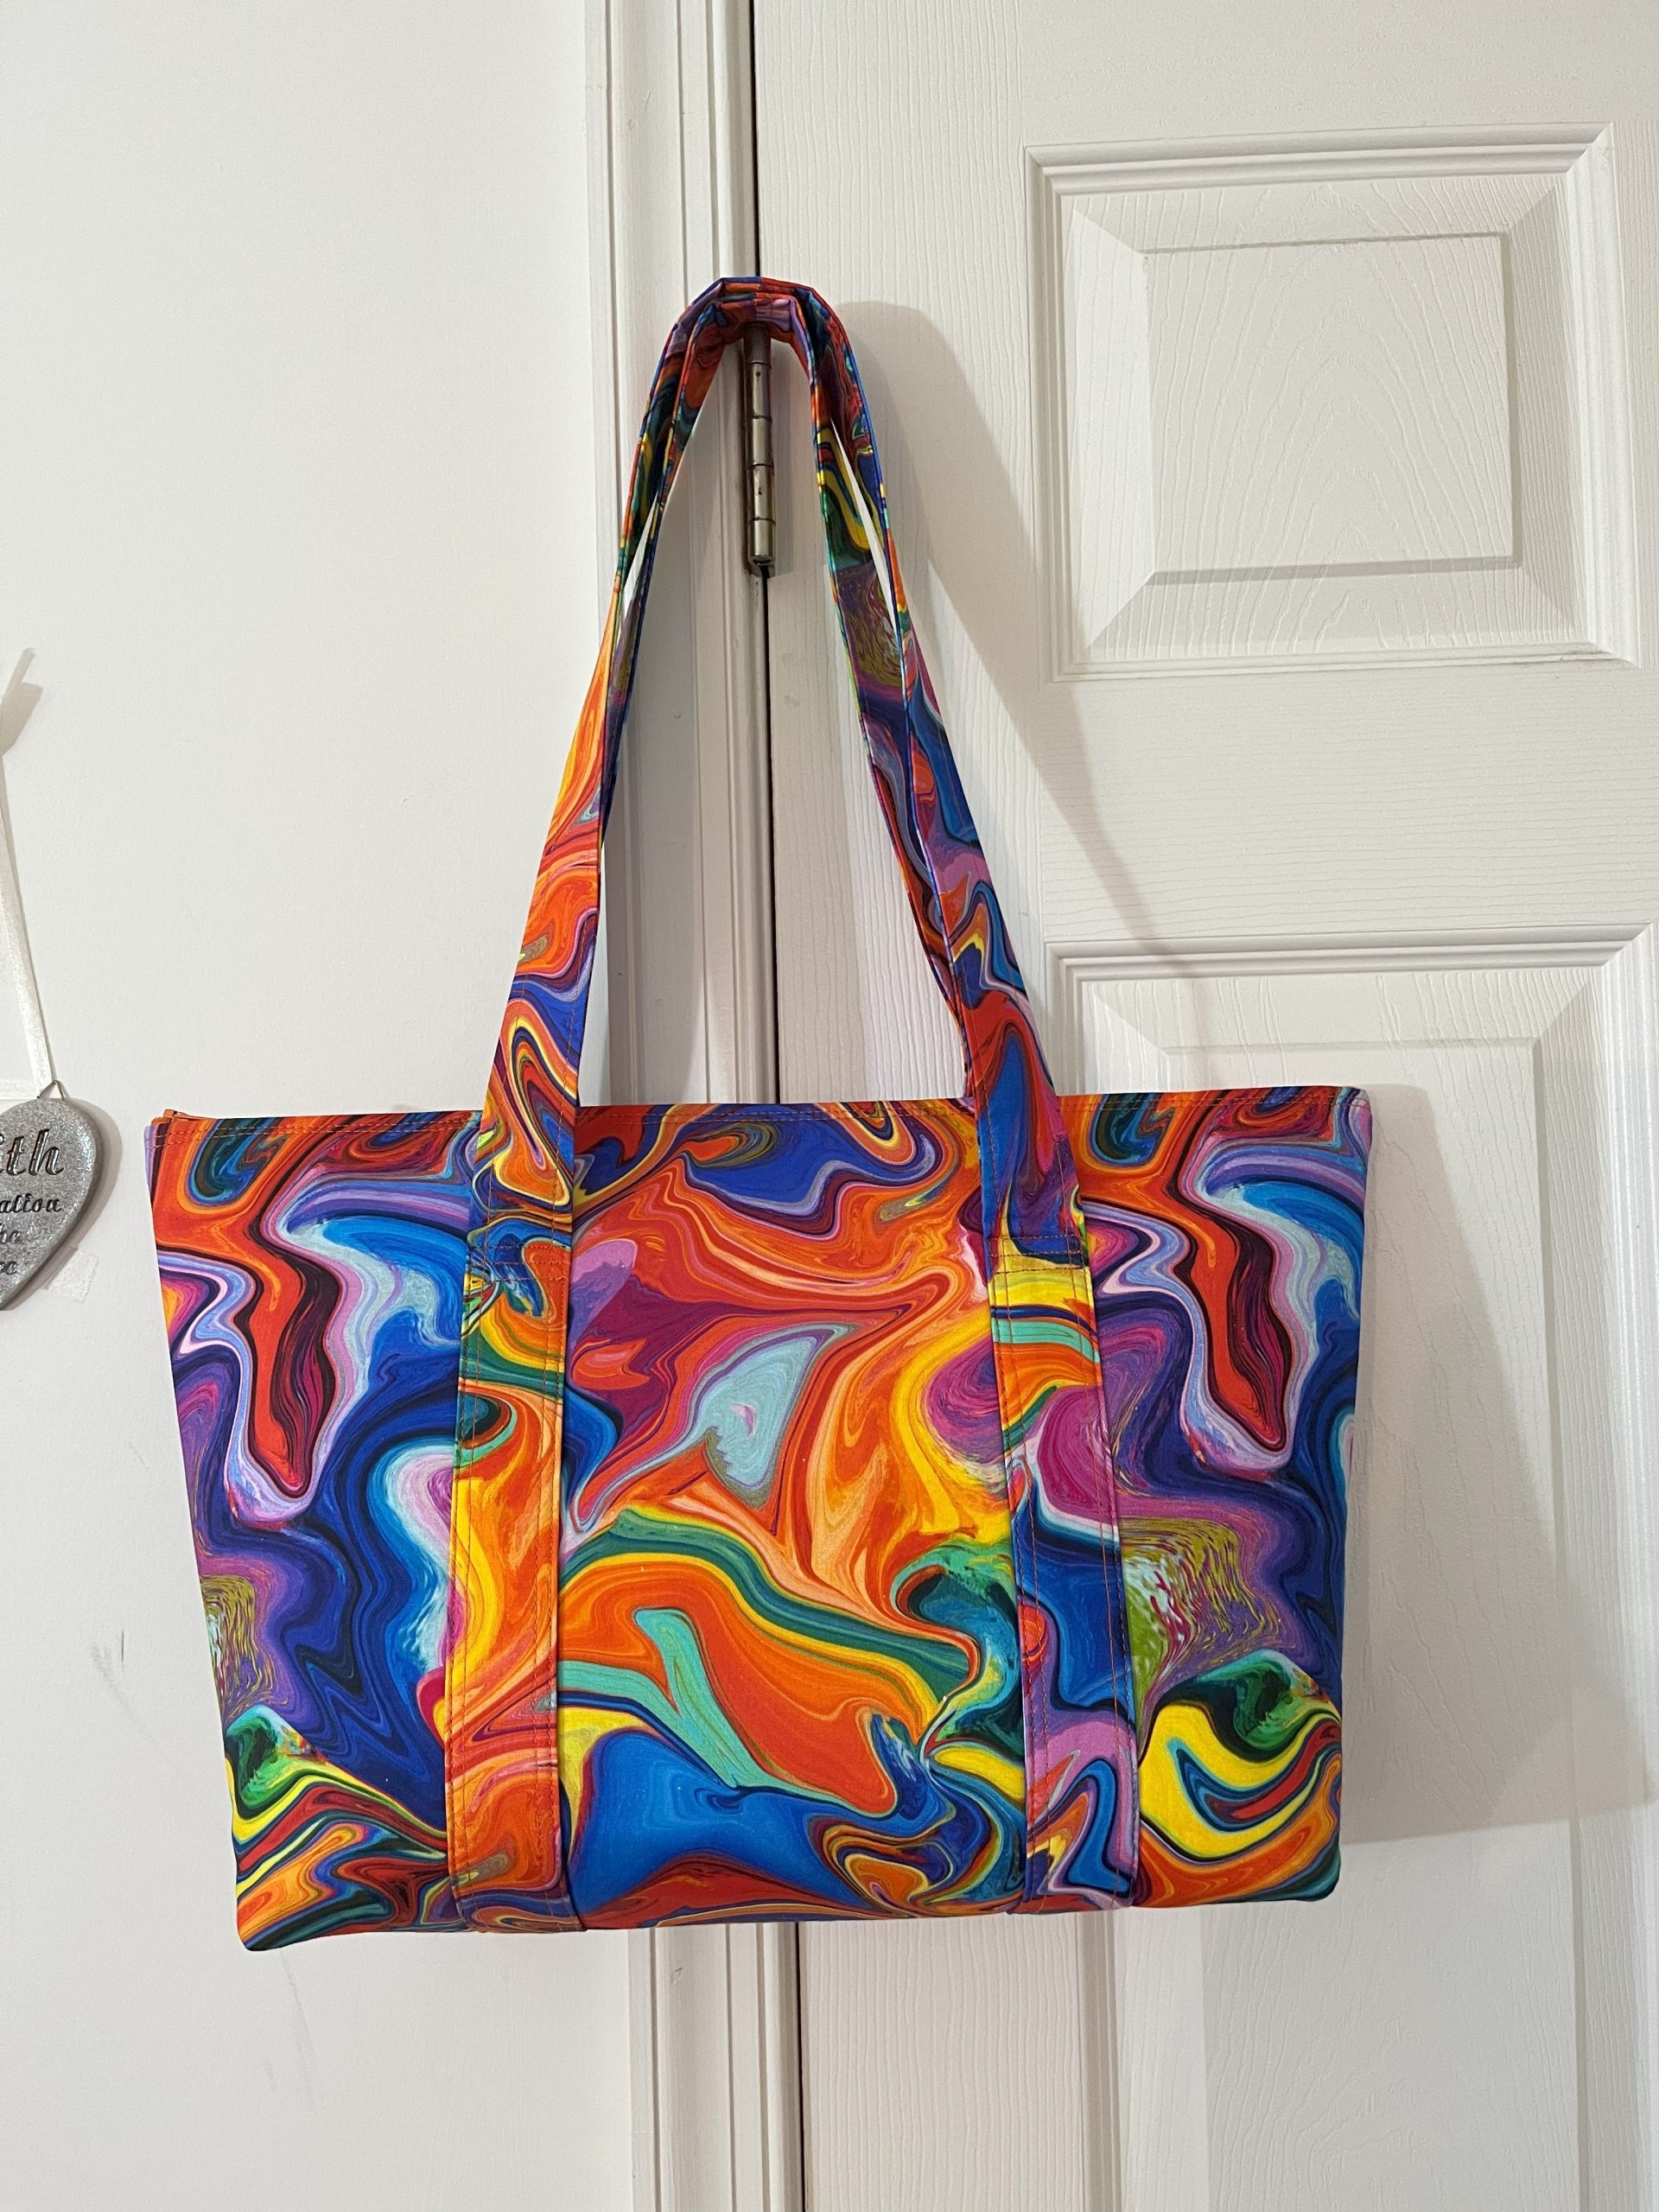 Beverly’s Beautiful Bags & More